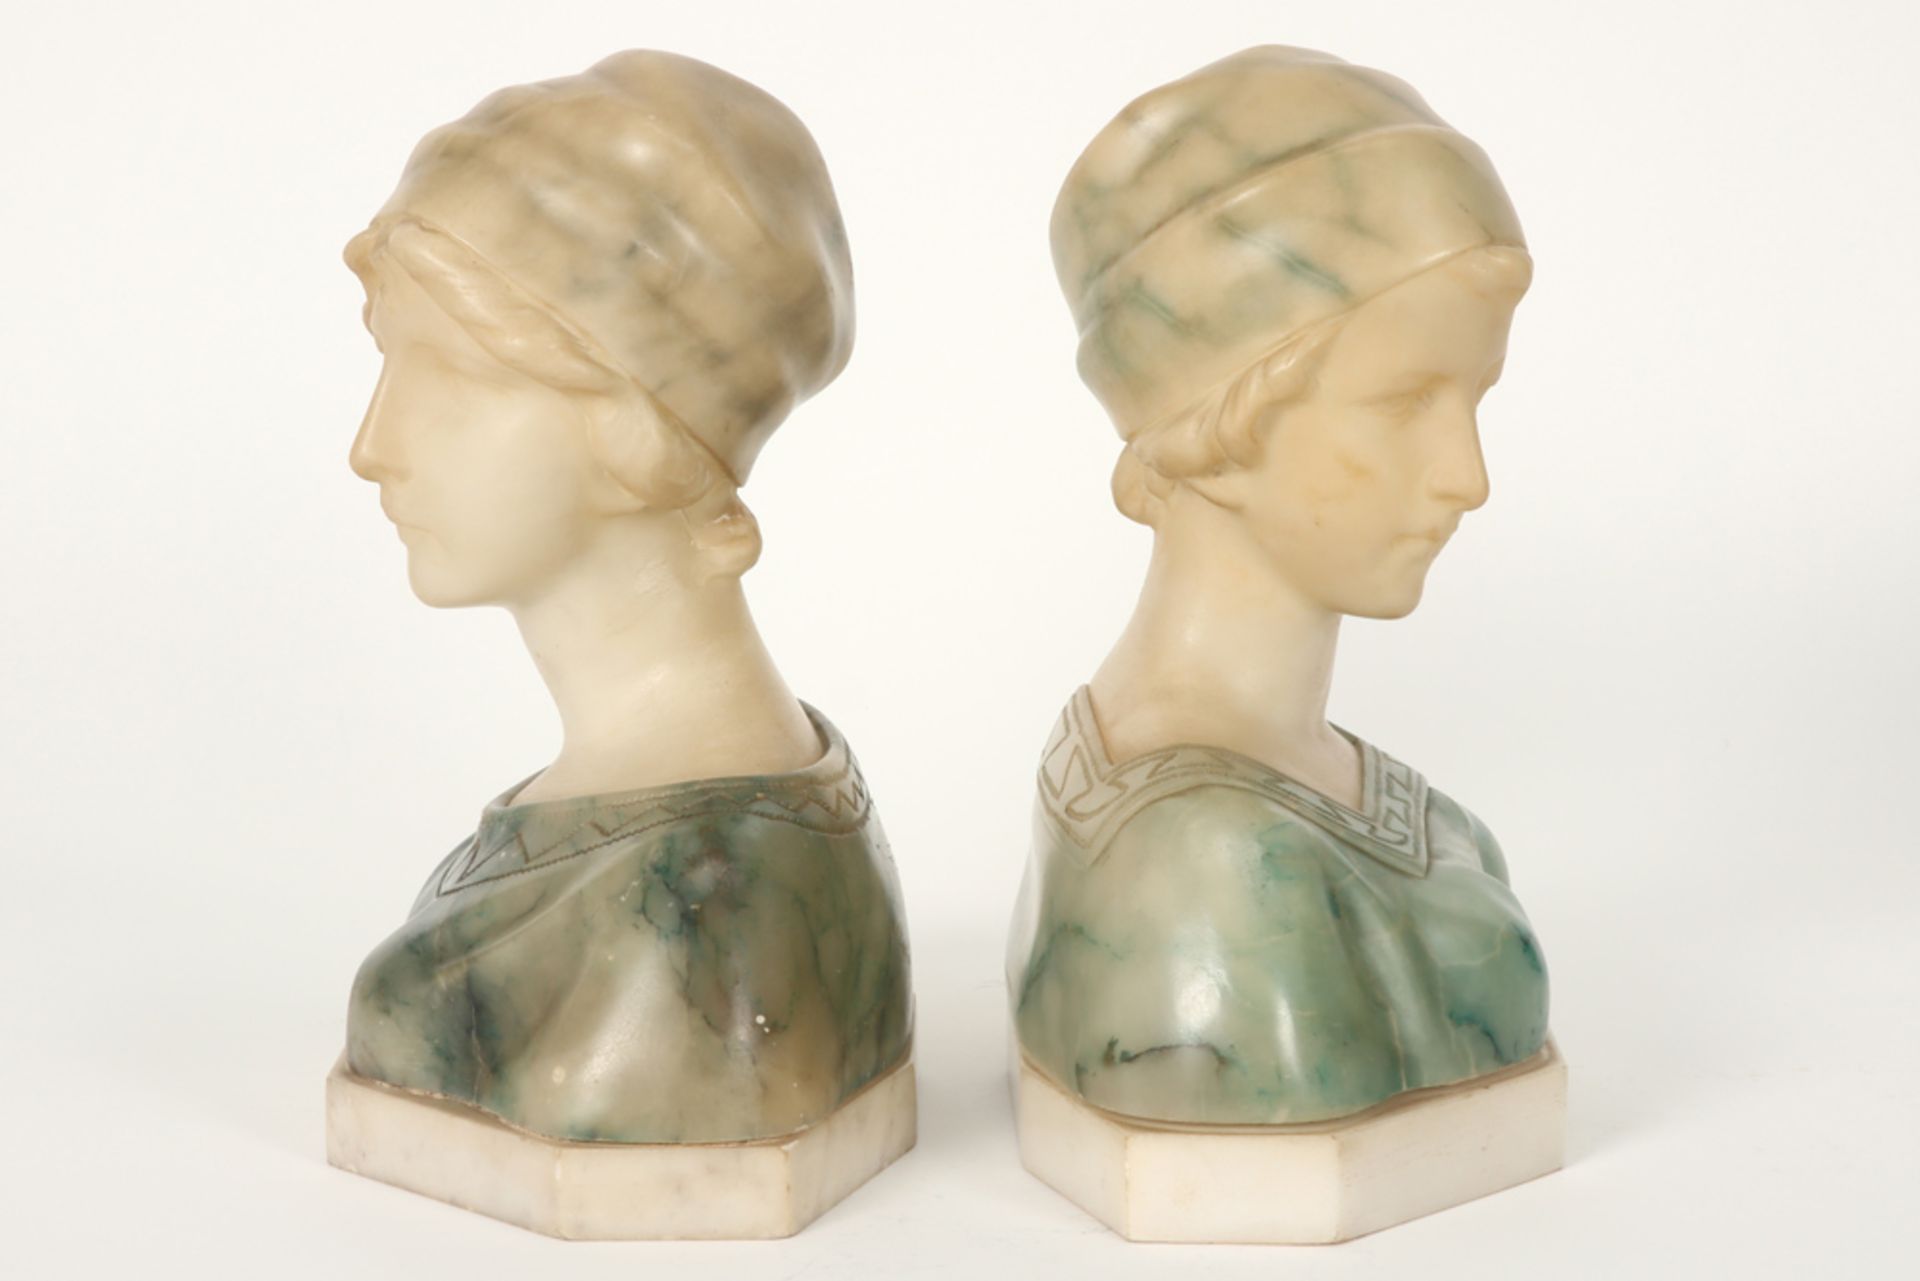 pair of antique sculptures in alabaster and marble - signed Richard Aurili || AURILI RICHARD (1834 - - Image 2 of 5